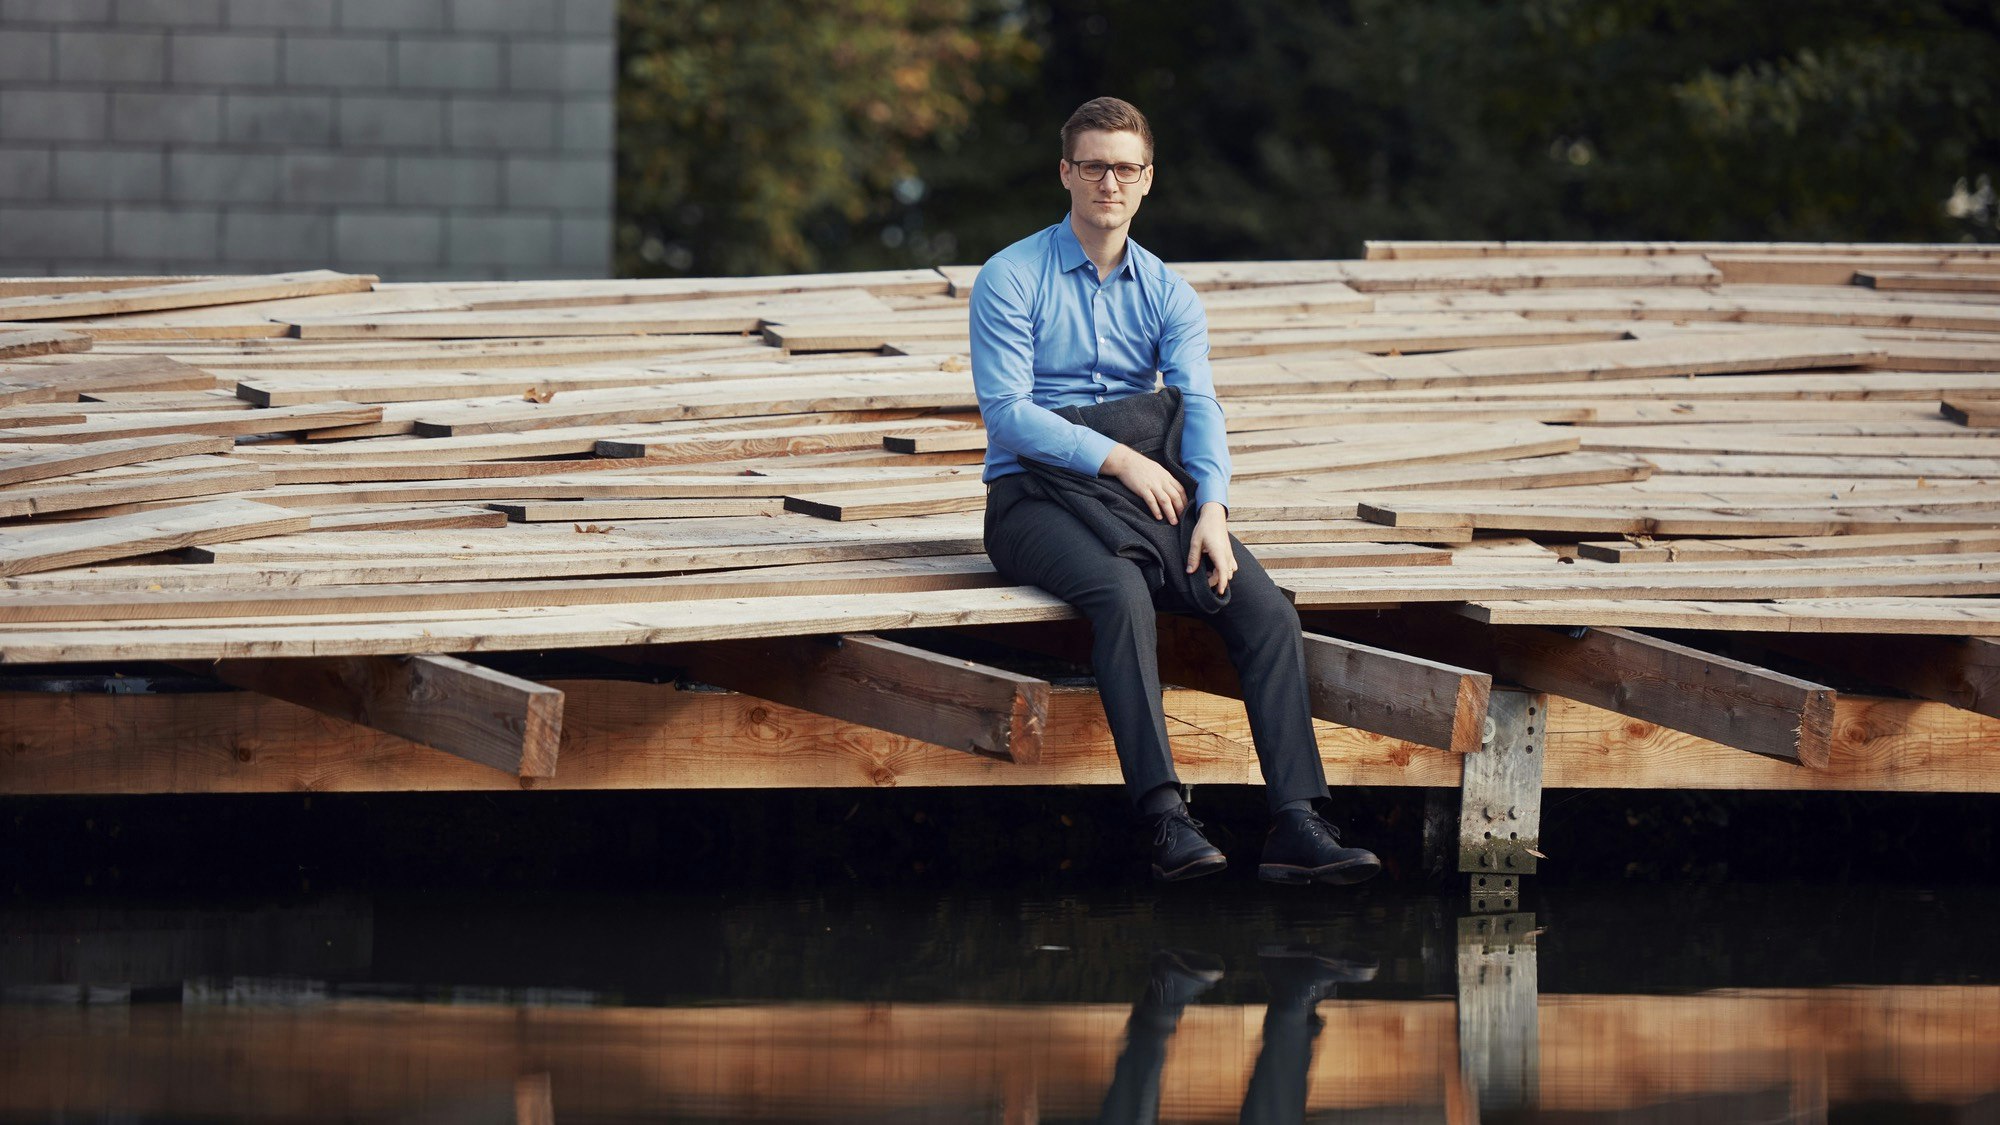 Man in suit sitting on a wooden dock.